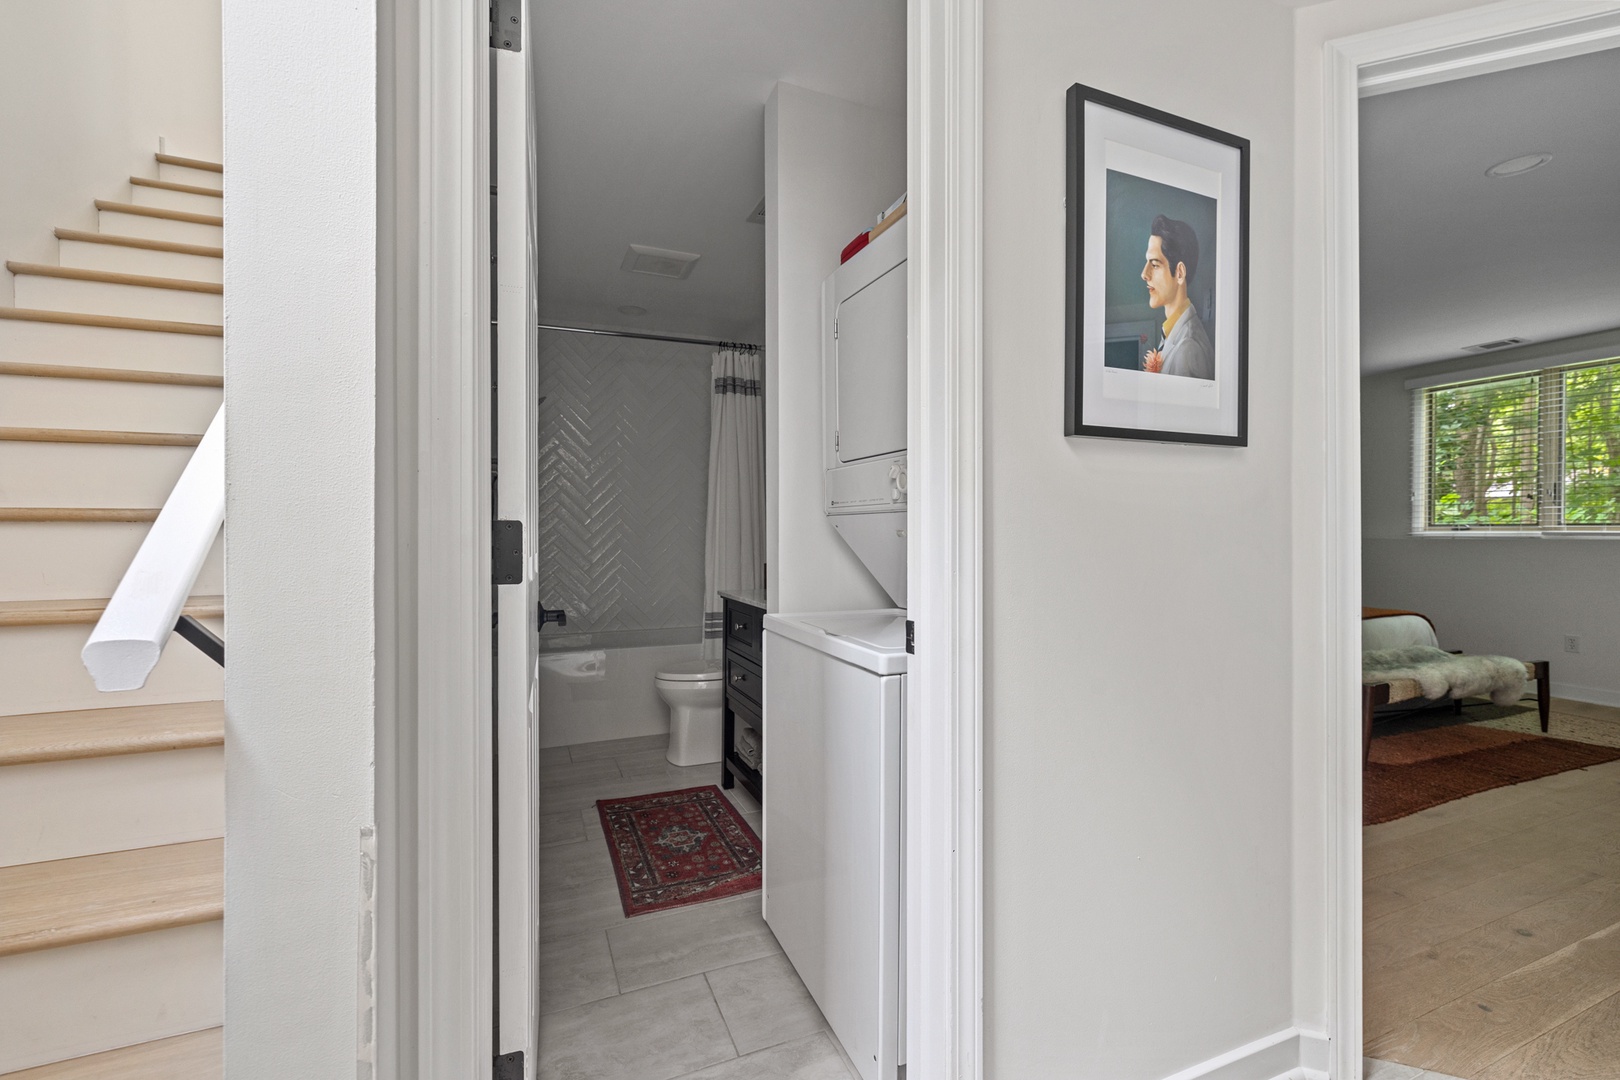 Enjoy the convenience of a washer-dryer in the master bathroom.